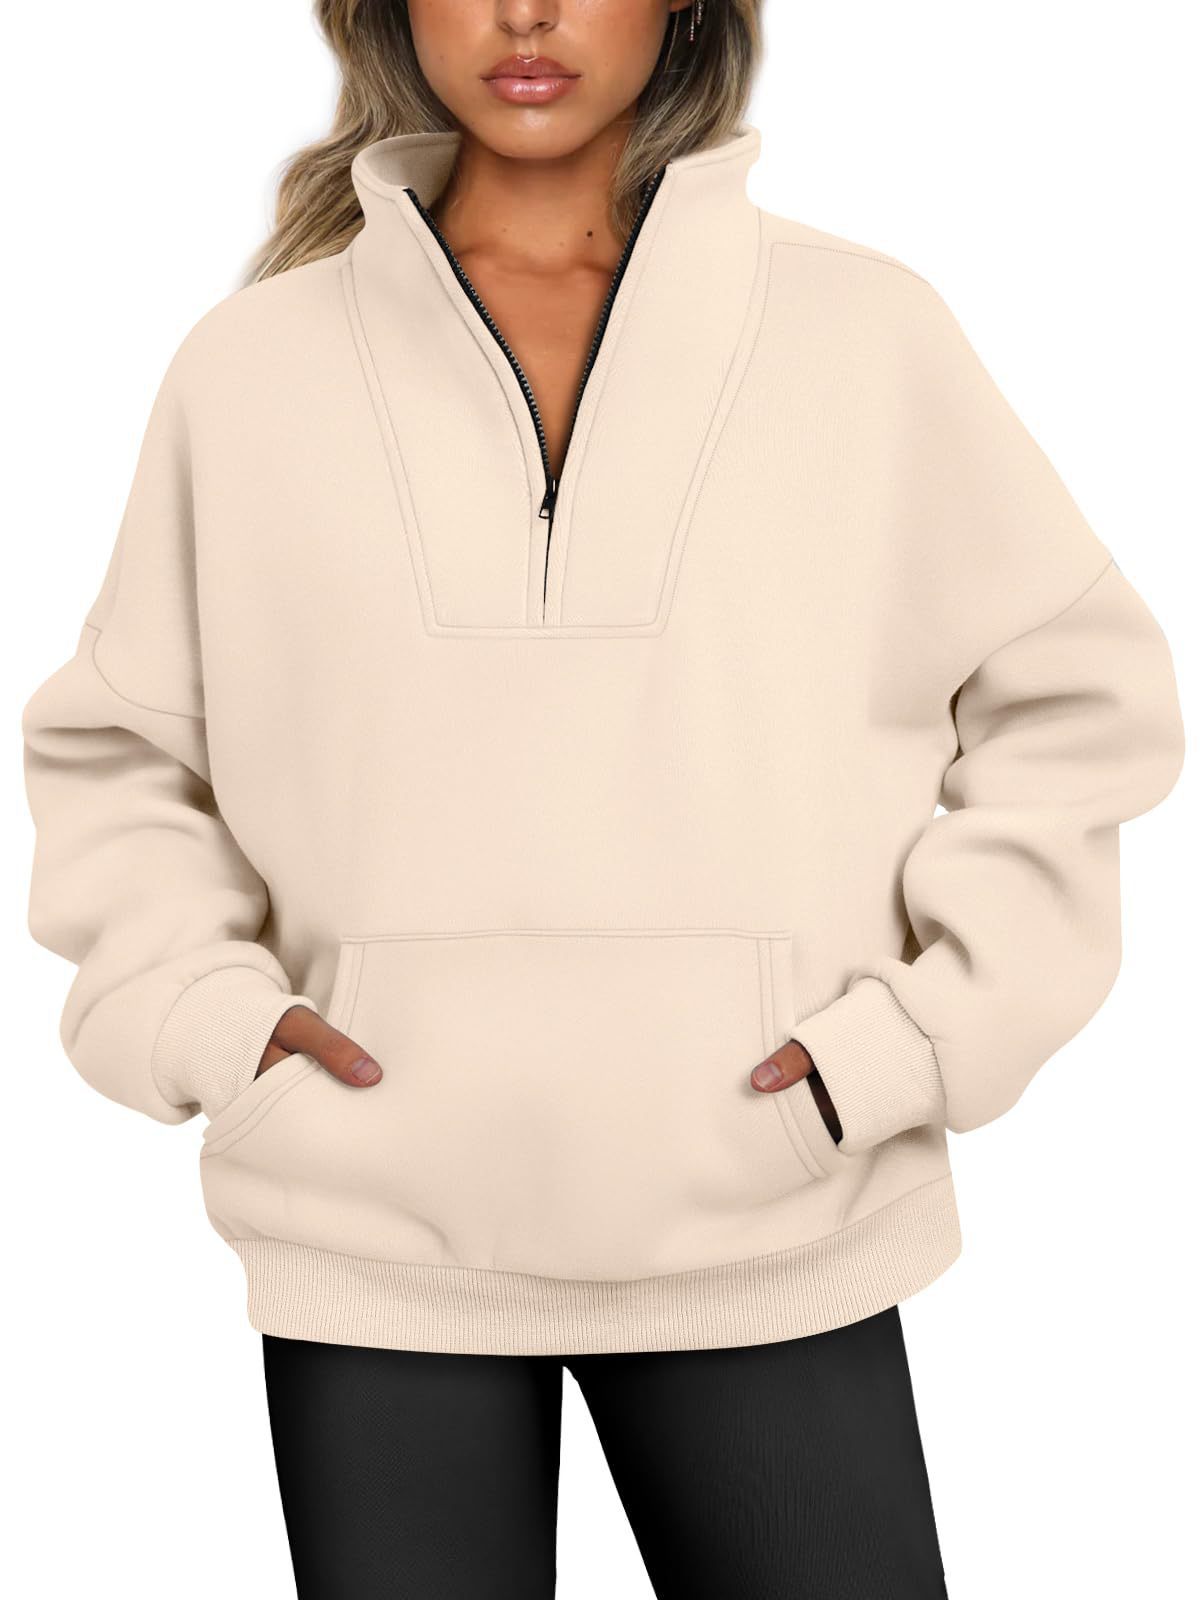 Women's Stand Collar Solid Color Hoodie Pocket Zipper Casual Sweaters